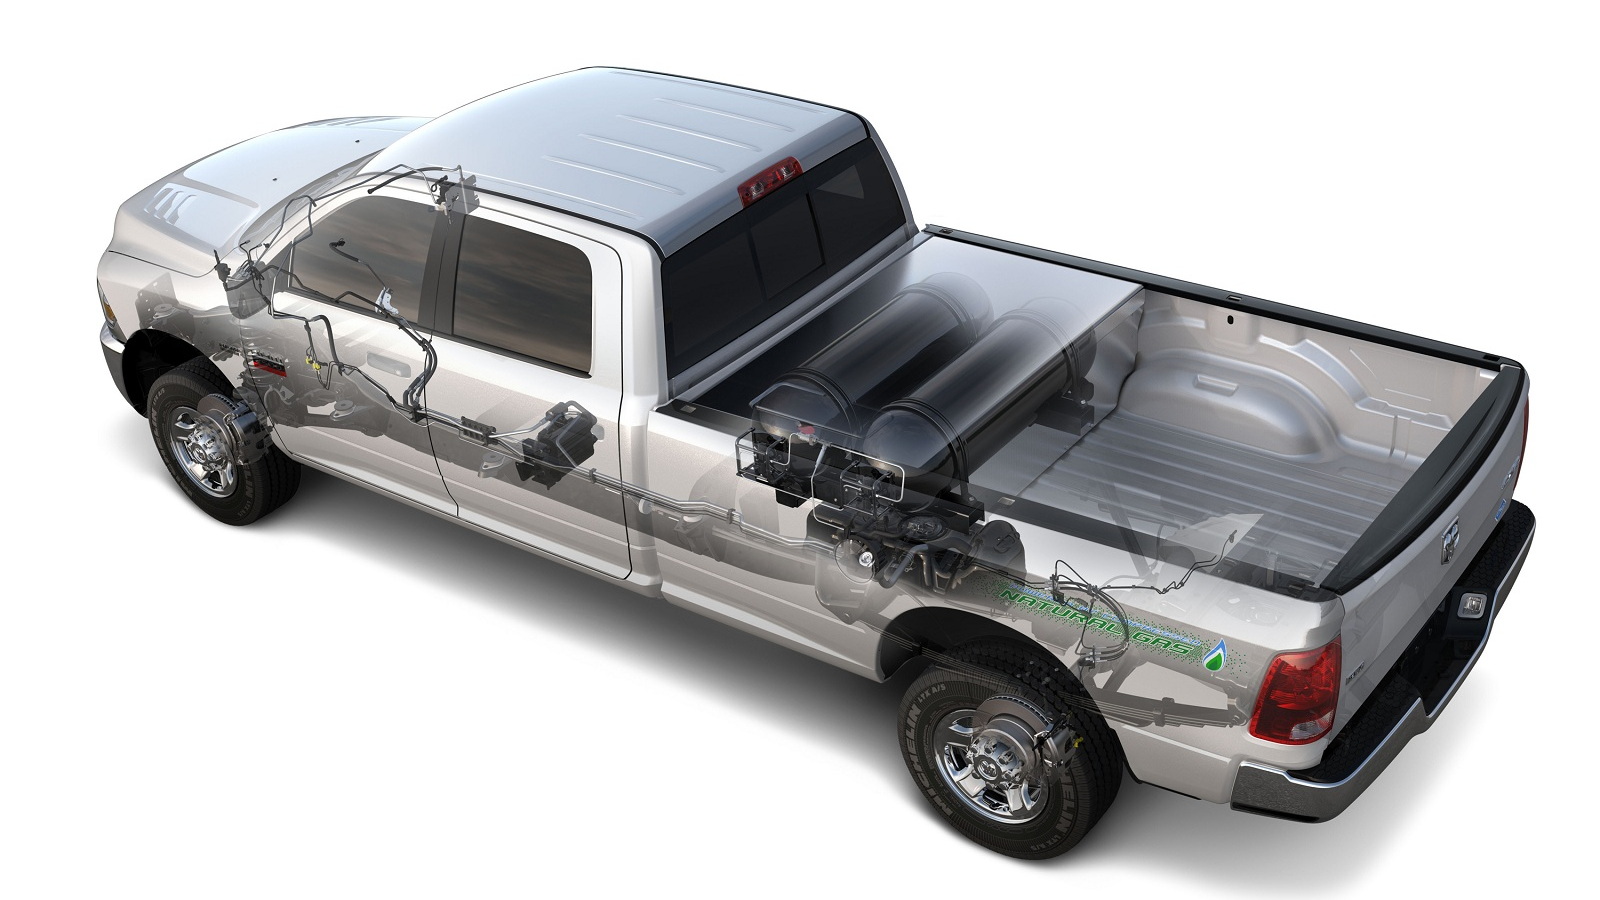 2013 Ram 2500 HD CNG pickup truck - natural-gas fuel system only